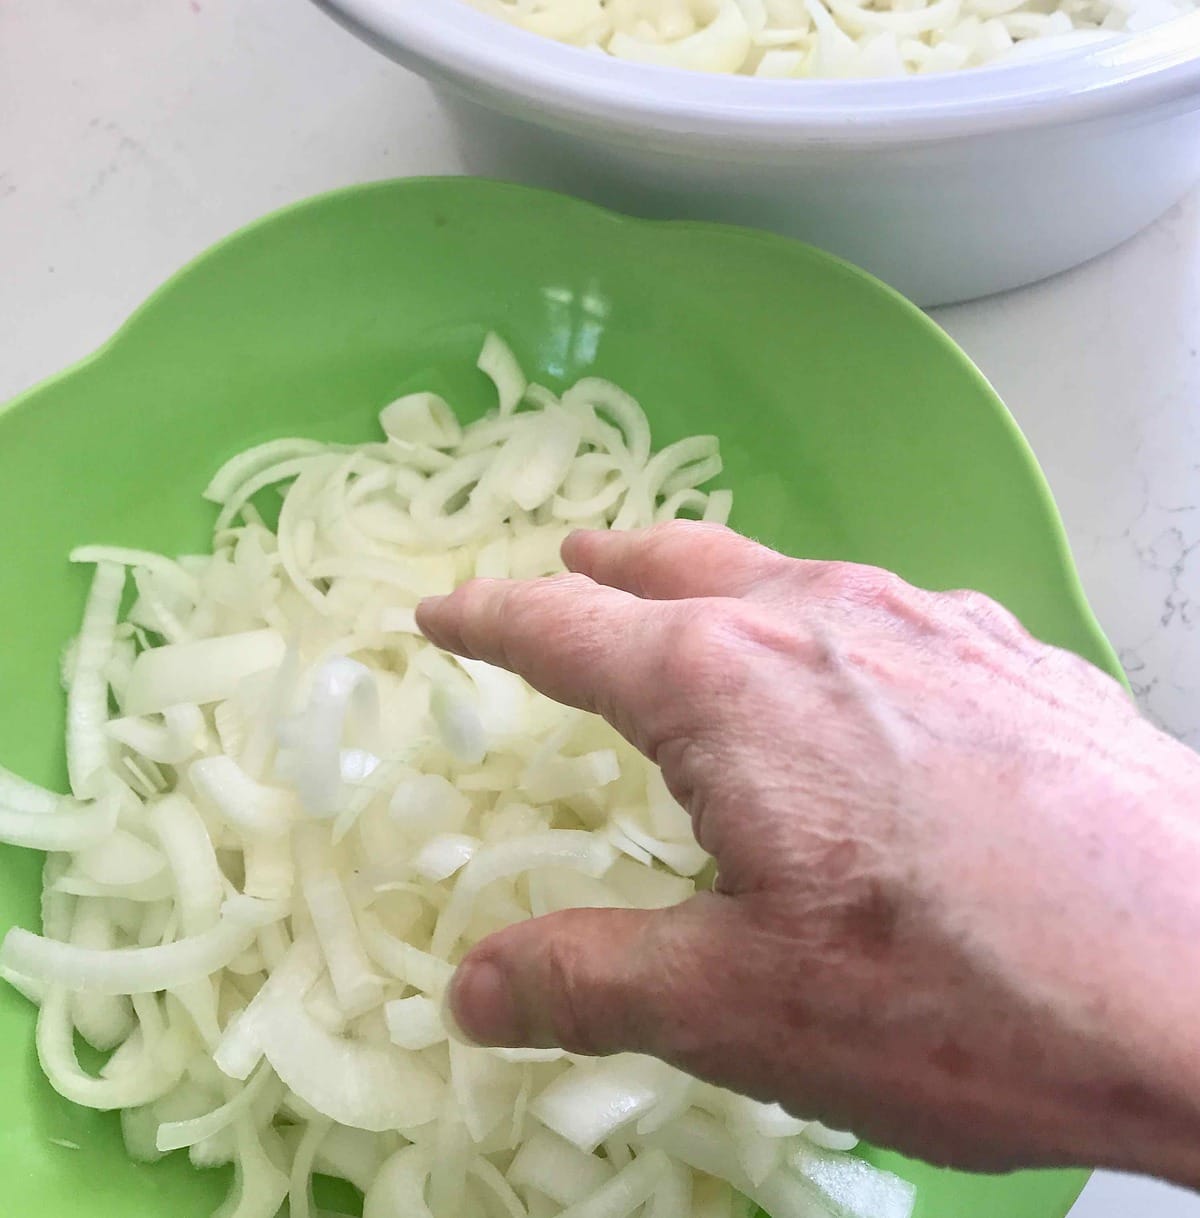 Toss the onions to separate the rings.